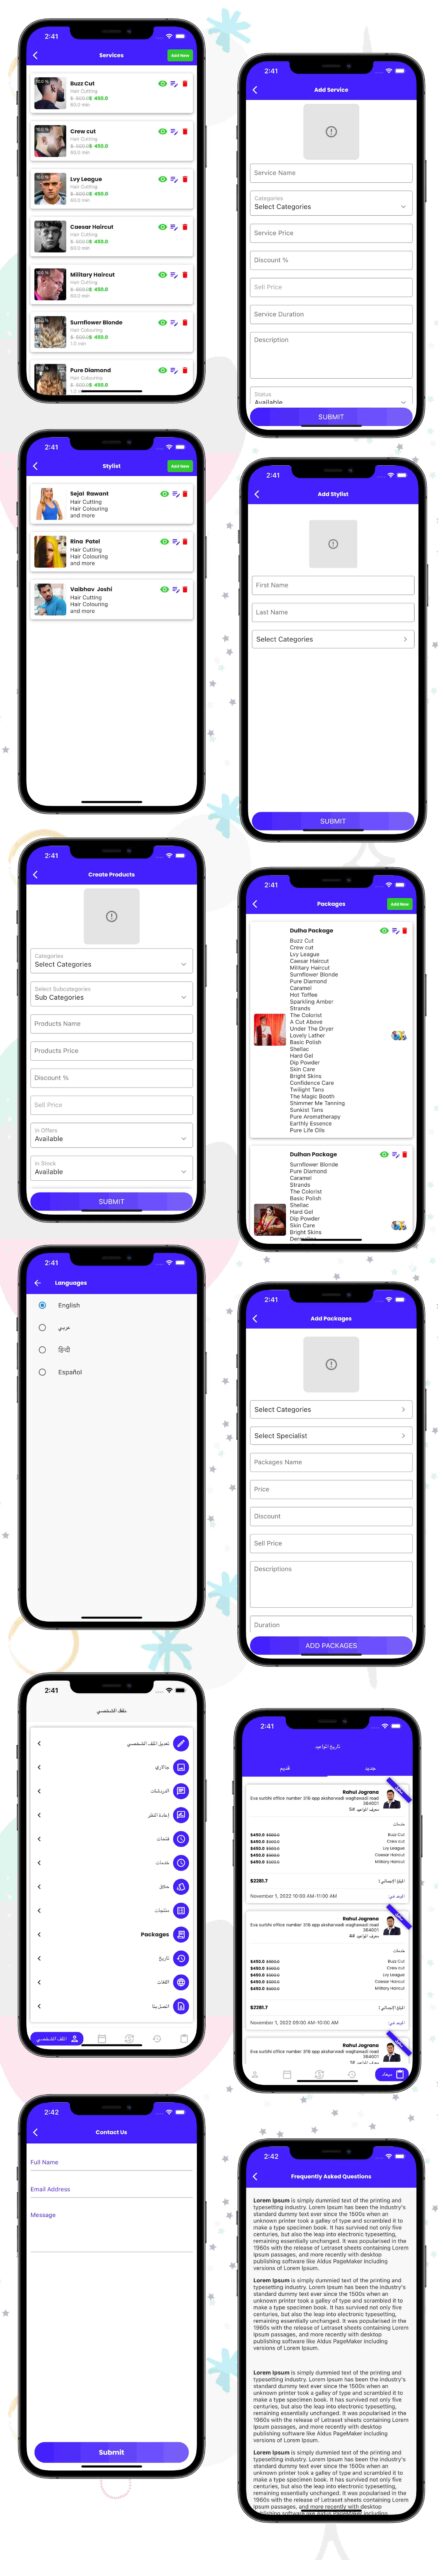 Multi Salon, Individual Appointments Booking System Full App Solution Flutter / Laravel / Angular - 11